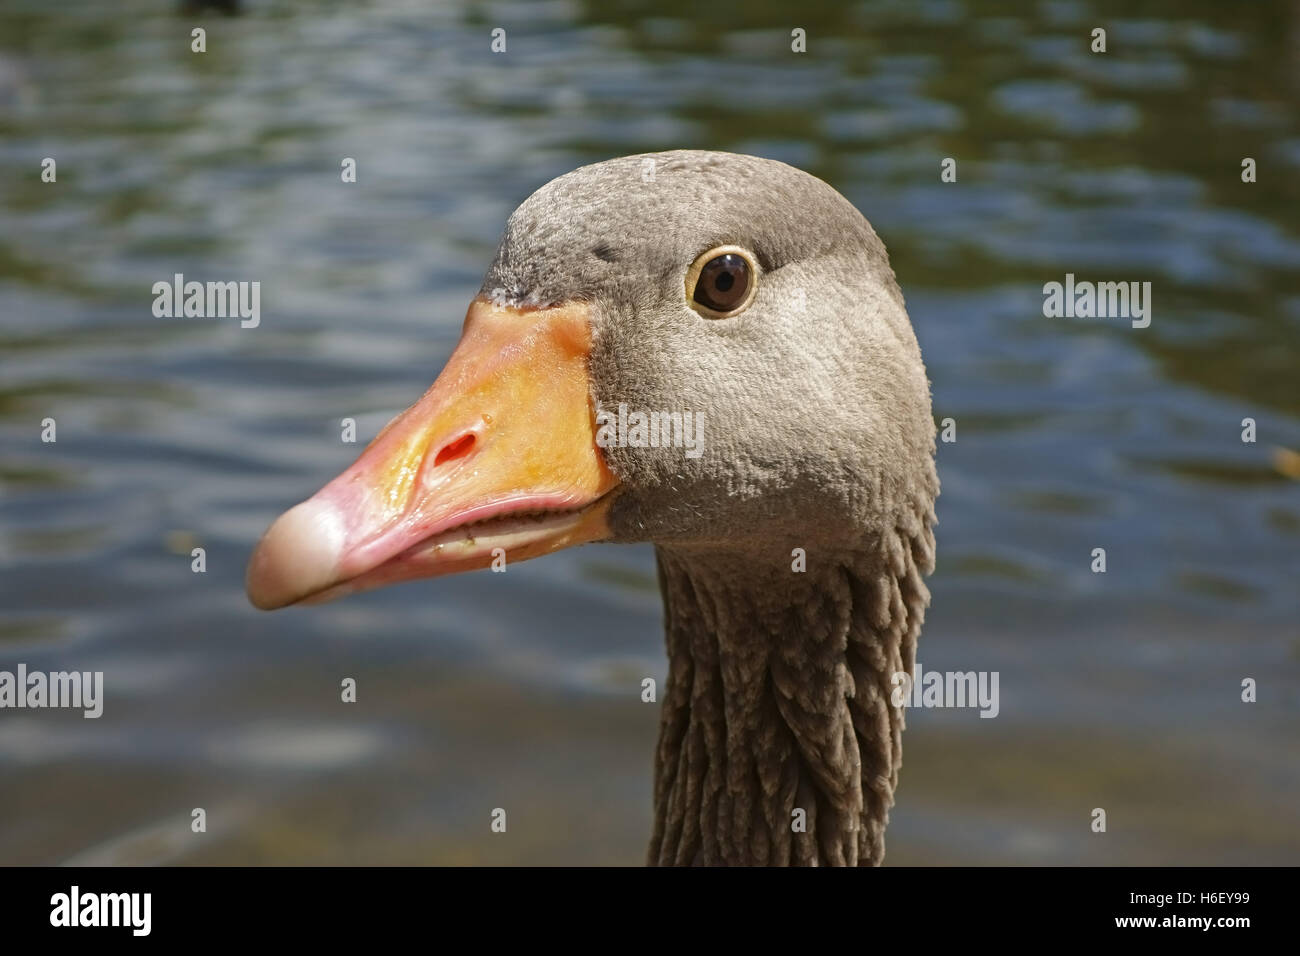 Head of a greylag goose, Anser anser, with pink beak and grey plumage on a lake in St James' Park, London Stock Photo